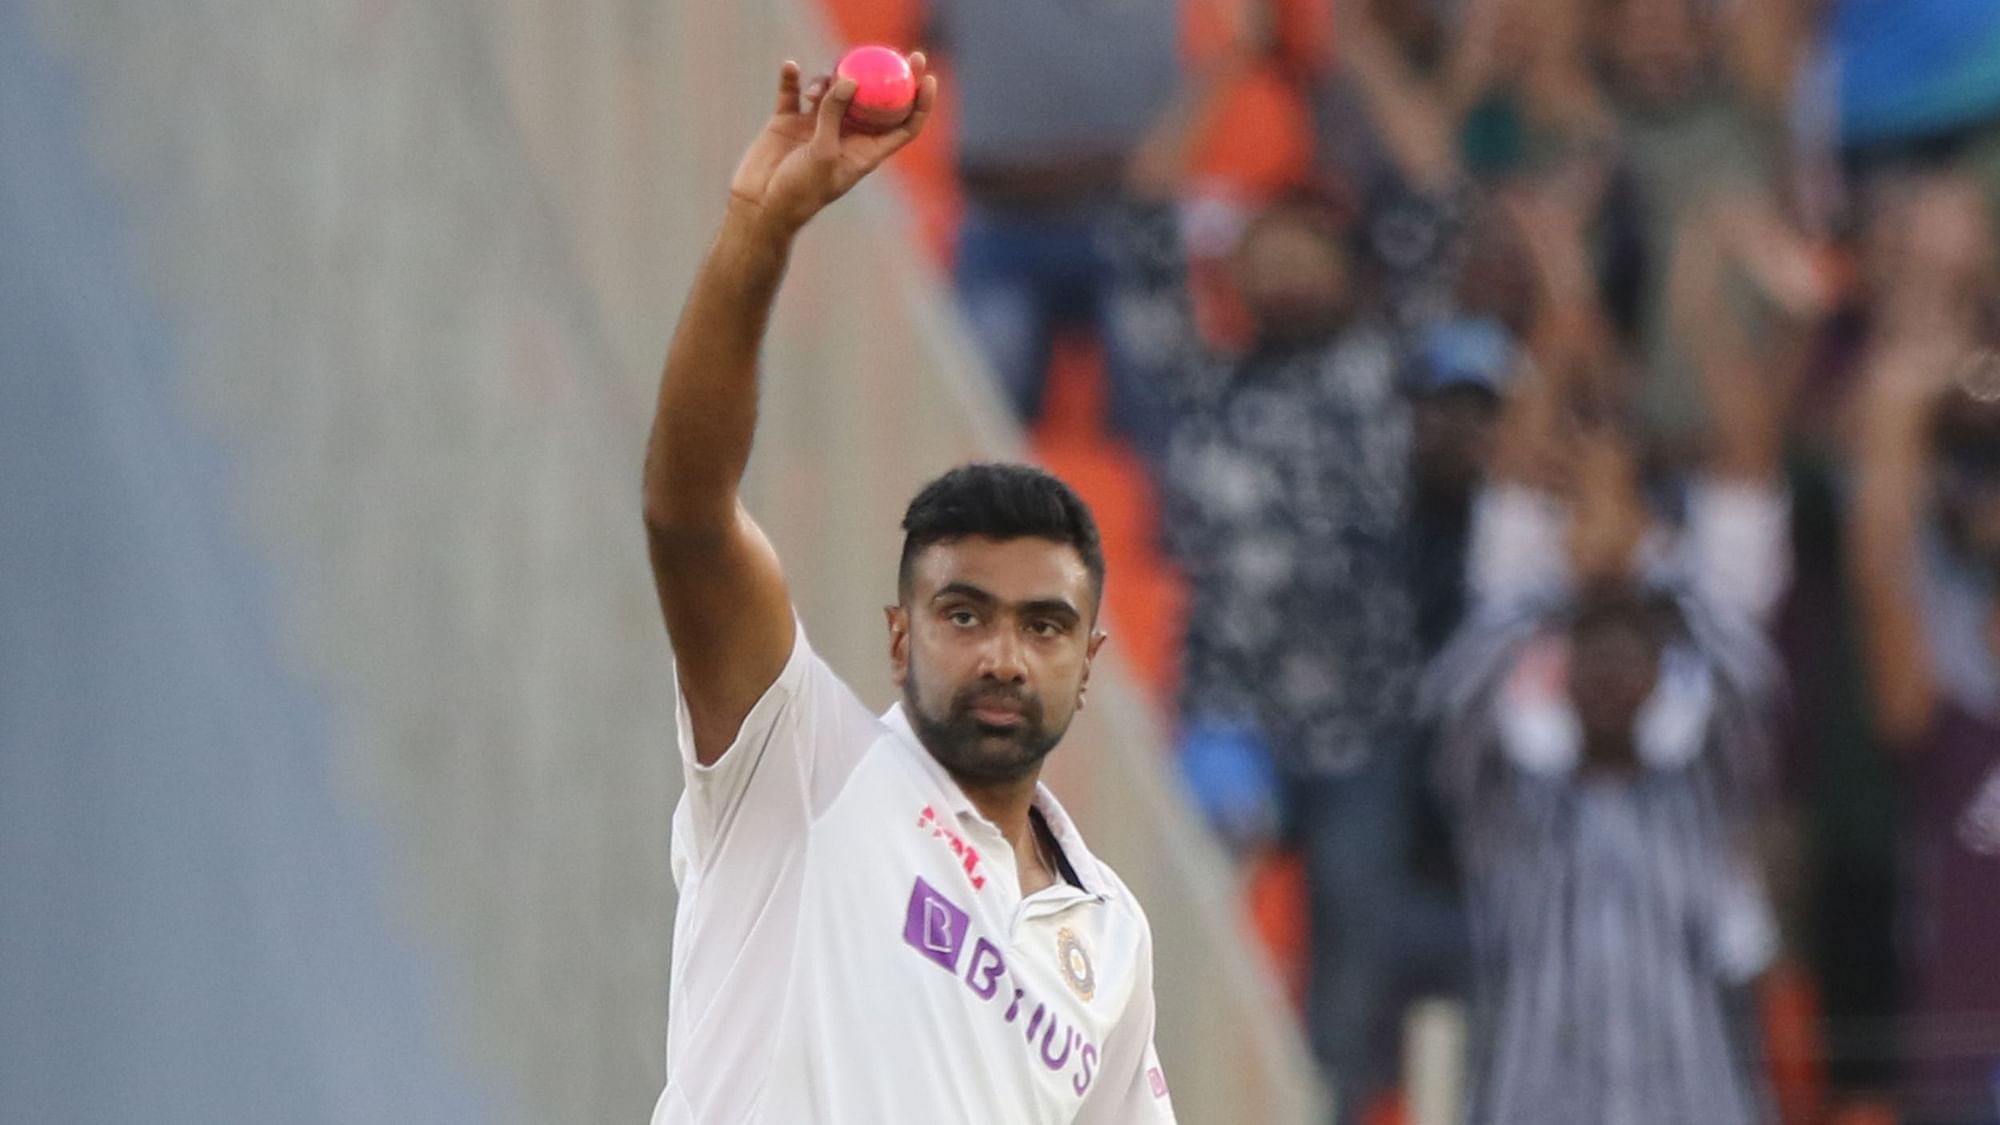 Ravichandran Ashwin picked his 400th Test wicket when he trapped Jofra Archer lbw on Day 2 of the 3rd Test vs England.